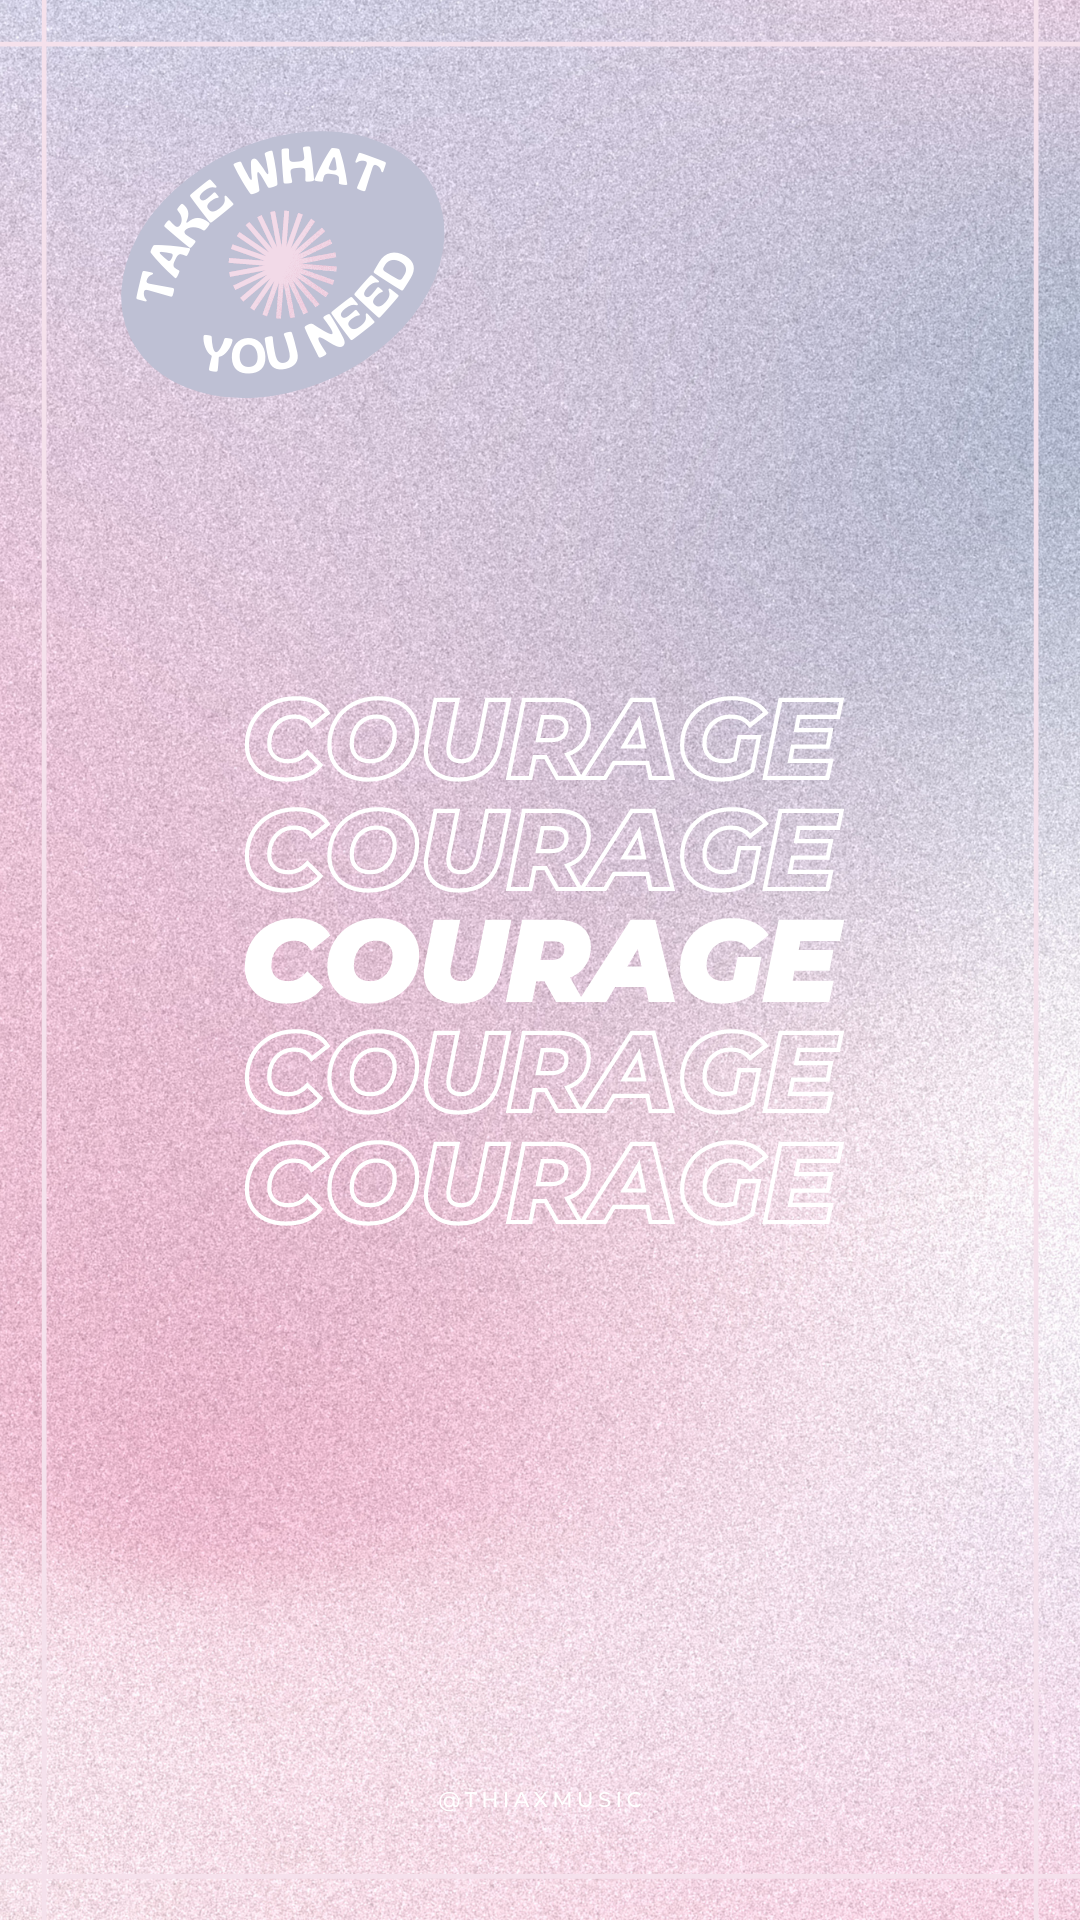 13 Courage.png